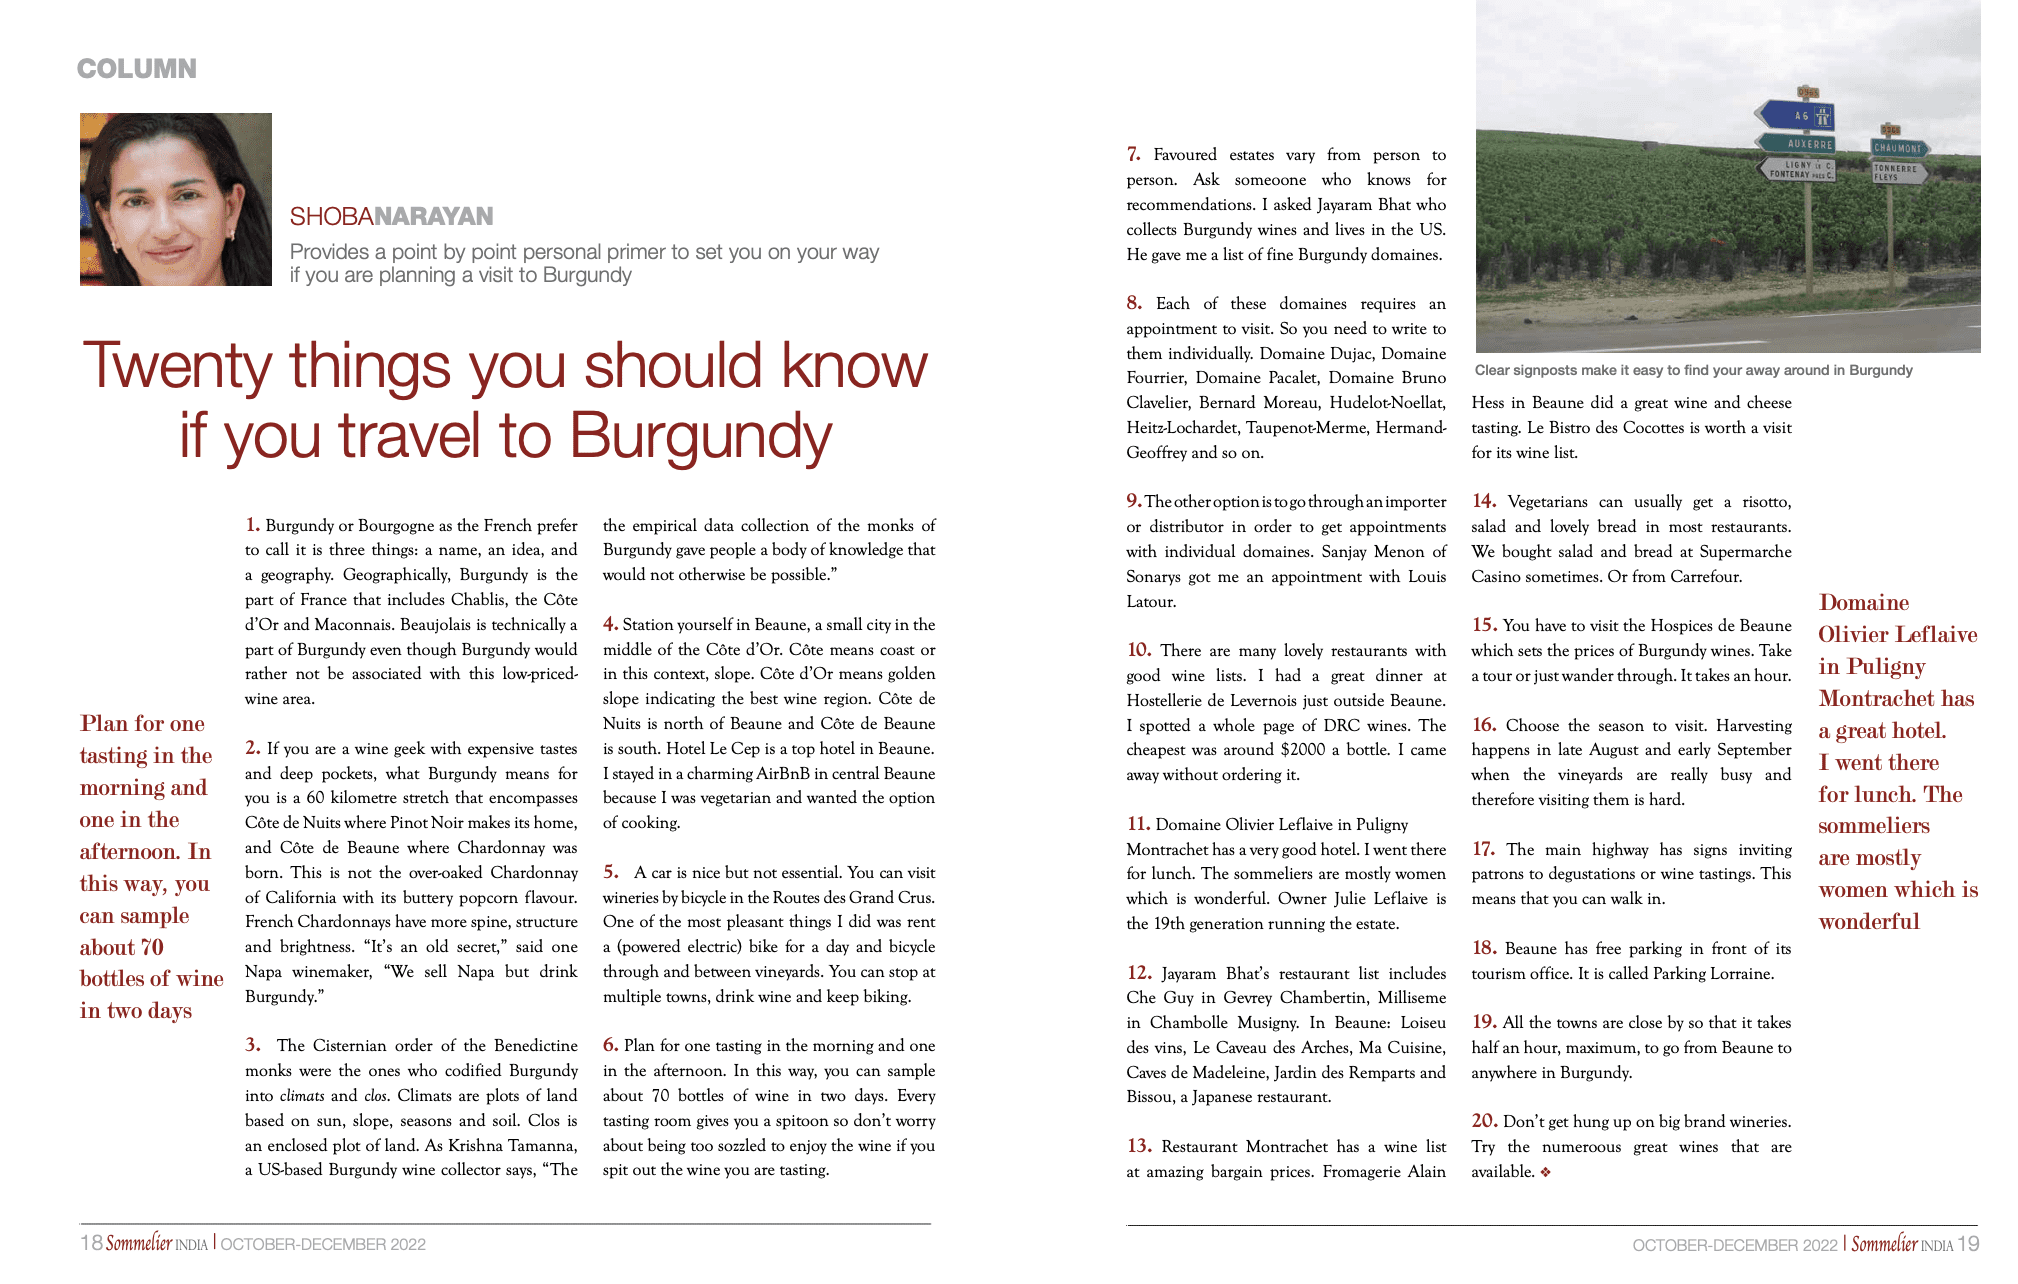 Twenty things about Burgundy. Sommelier.